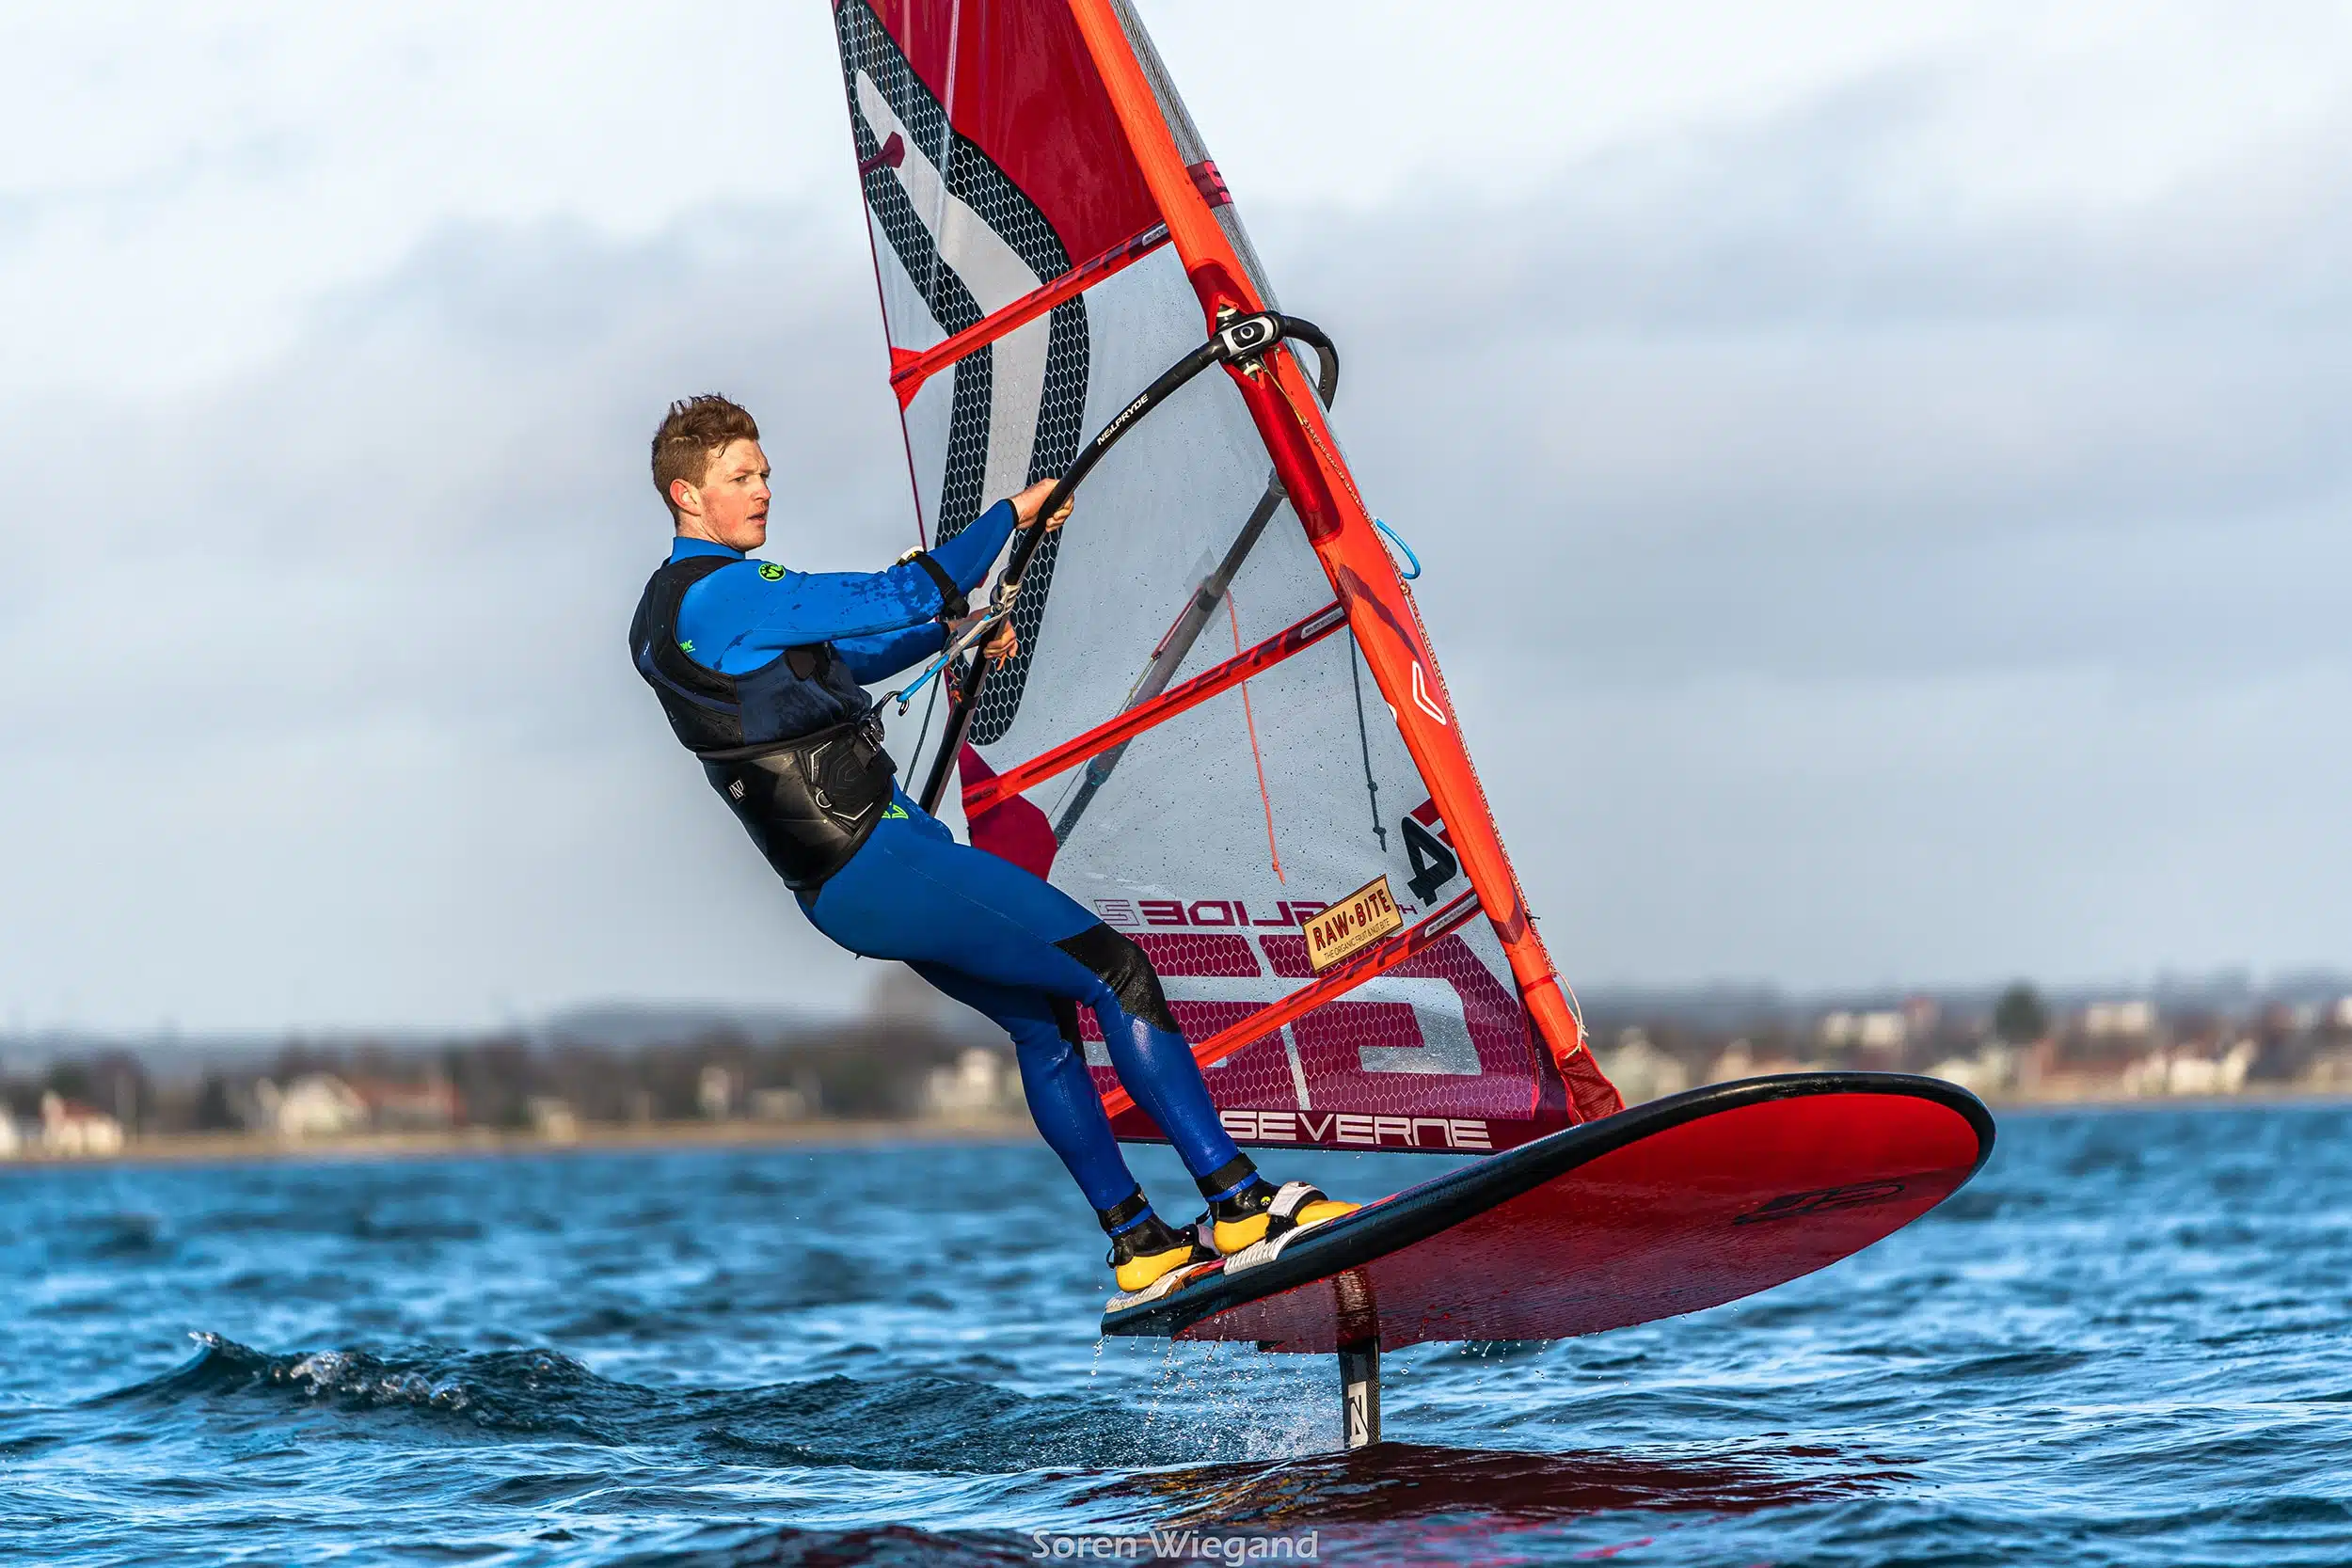 F4 Foils is pleased to announce Danish National Team member